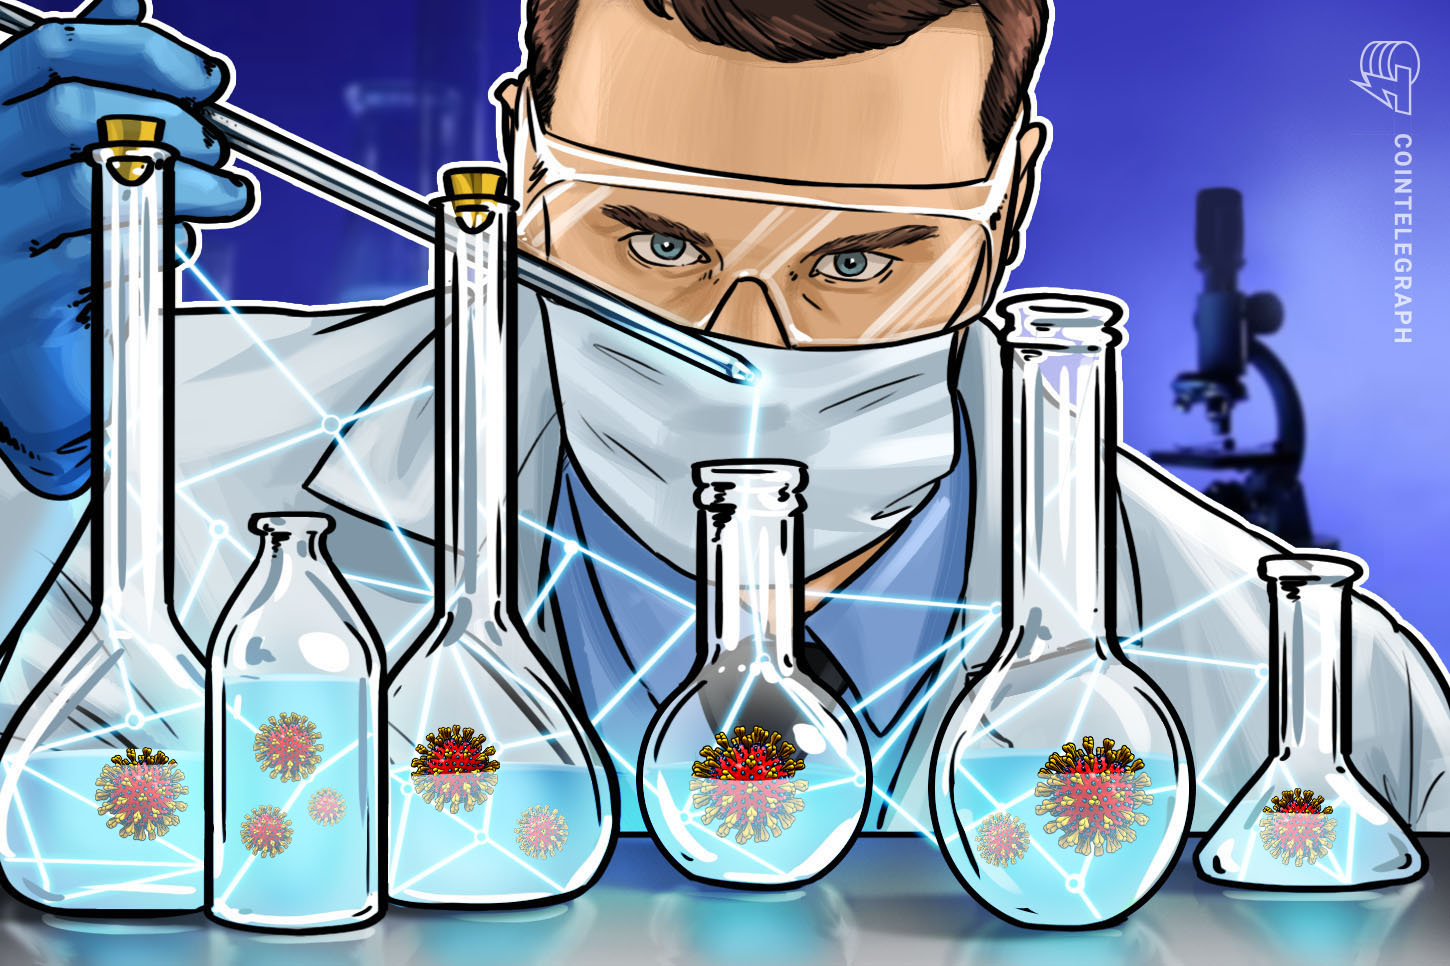 Grayscale survey connects COVID-19 pandemic to new Bitcoin purchases